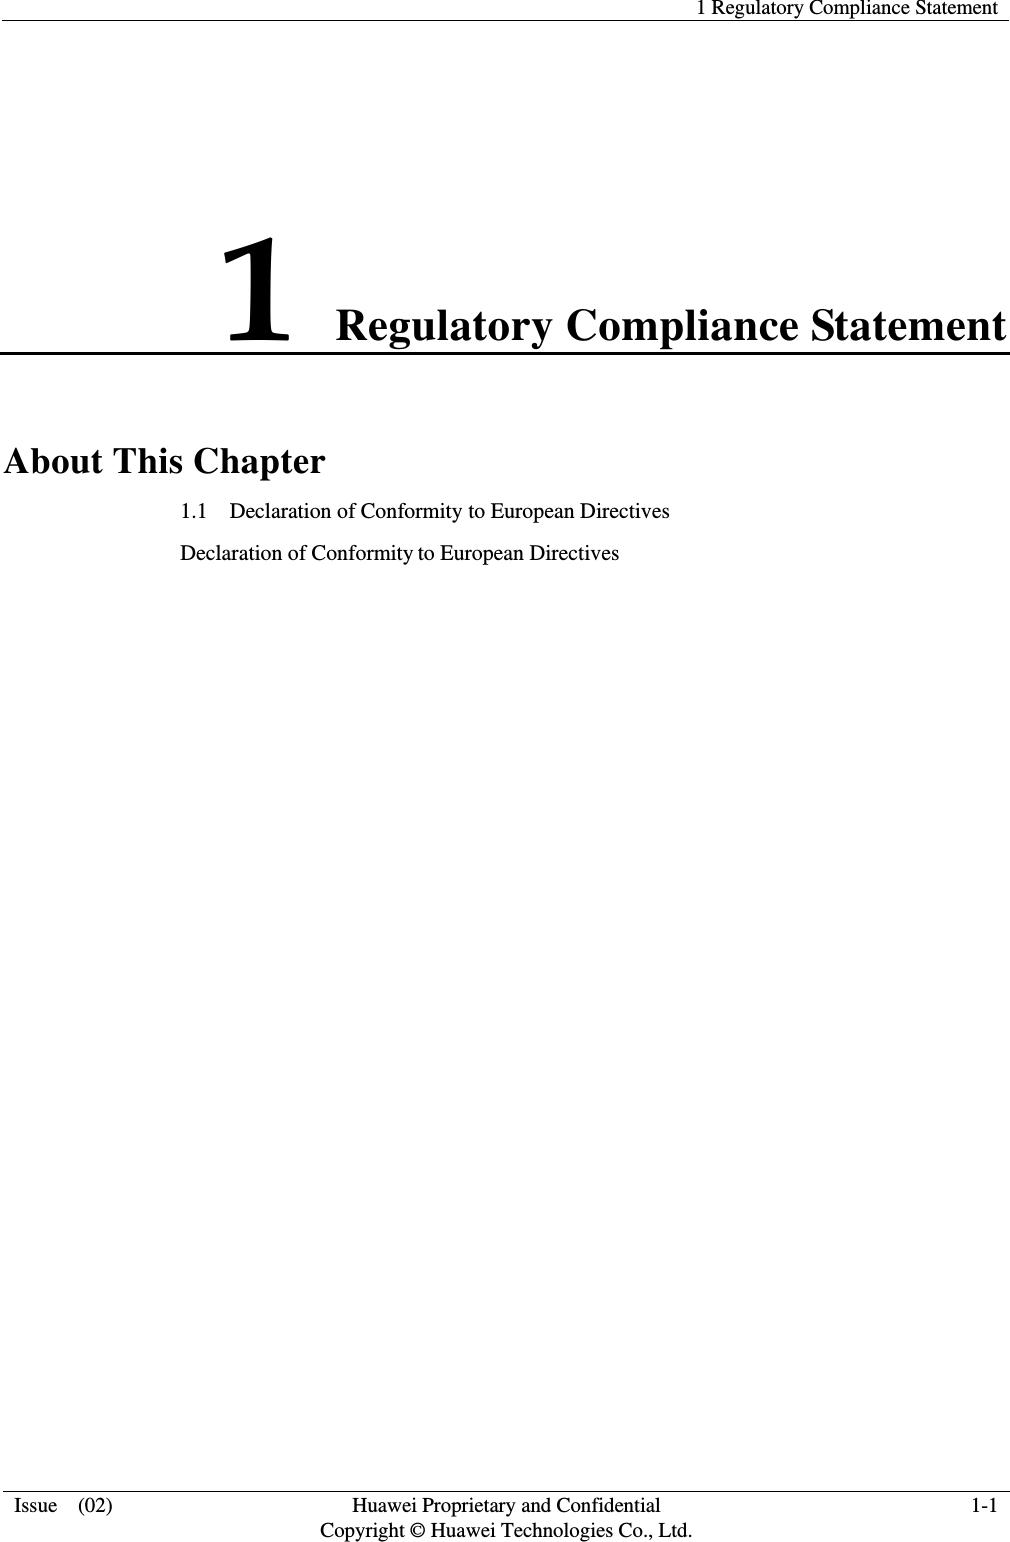   1 Regulatory Compliance Statement  Issue  (02)  Huawei Proprietary and Confidential     Copyright © Huawei Technologies Co., Ltd. 1-1 1 Regulatory Compliance Statement About This Chapter 1.1    Declaration of Conformity to European Directives Declaration of Conformity to European Directives 